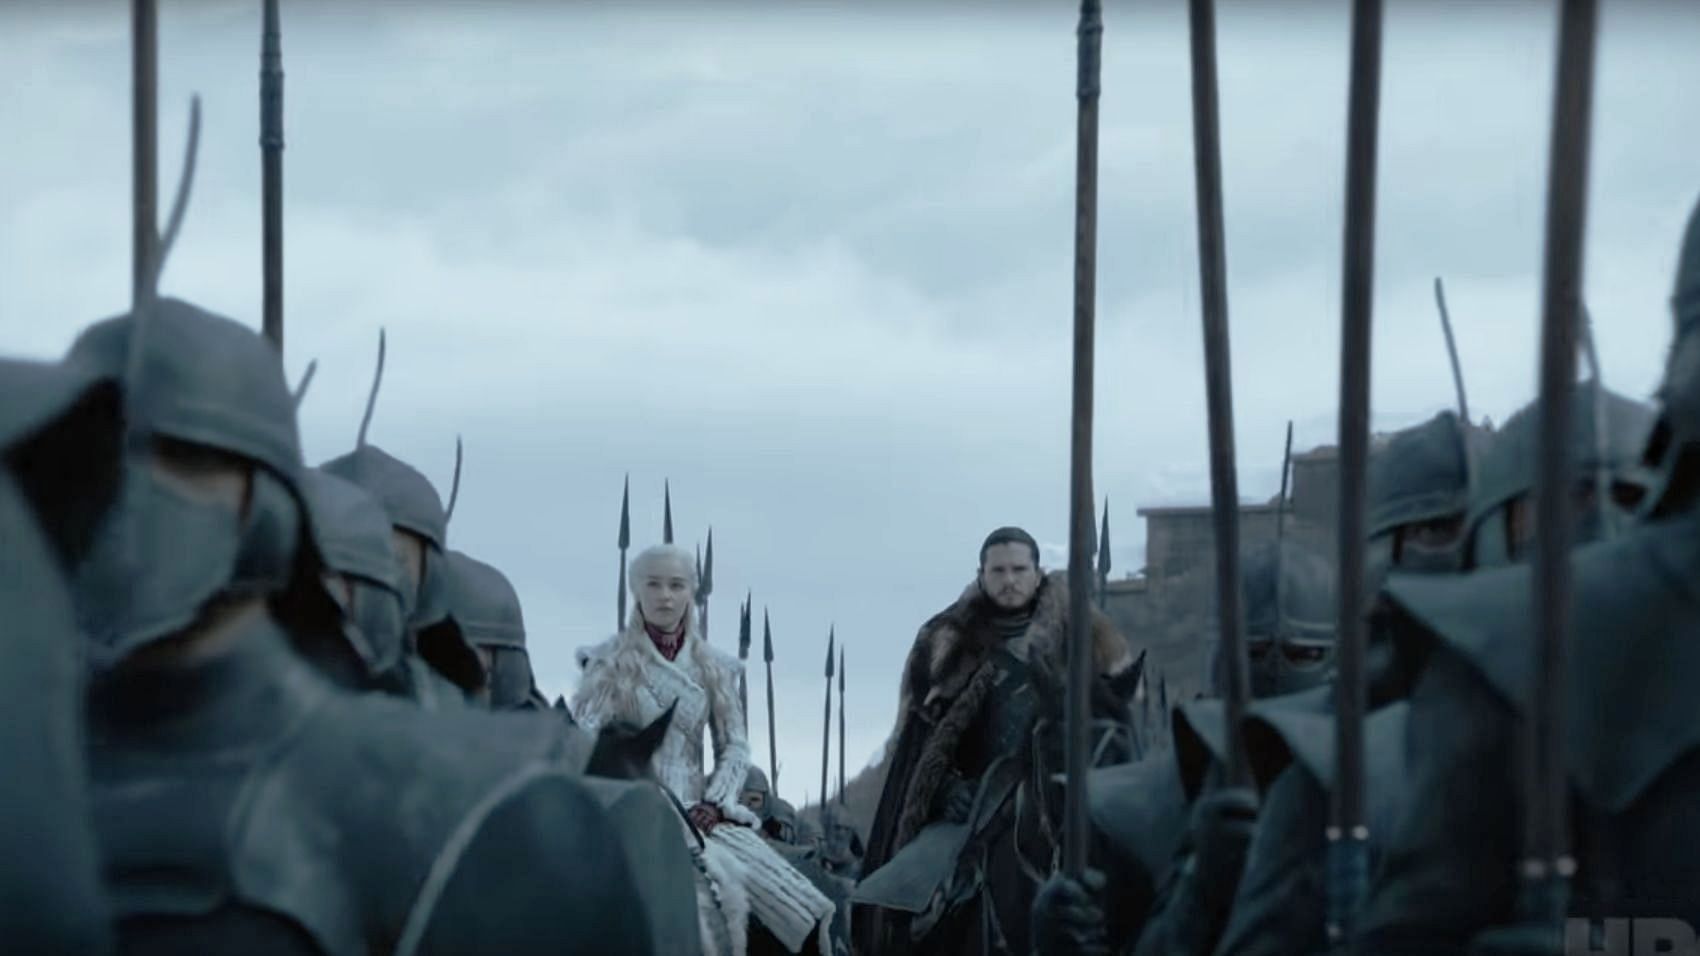 From surprise comebacks to confirmed fates to a bunch of speculations, here’s what the GoT Season 8 trailer holds.